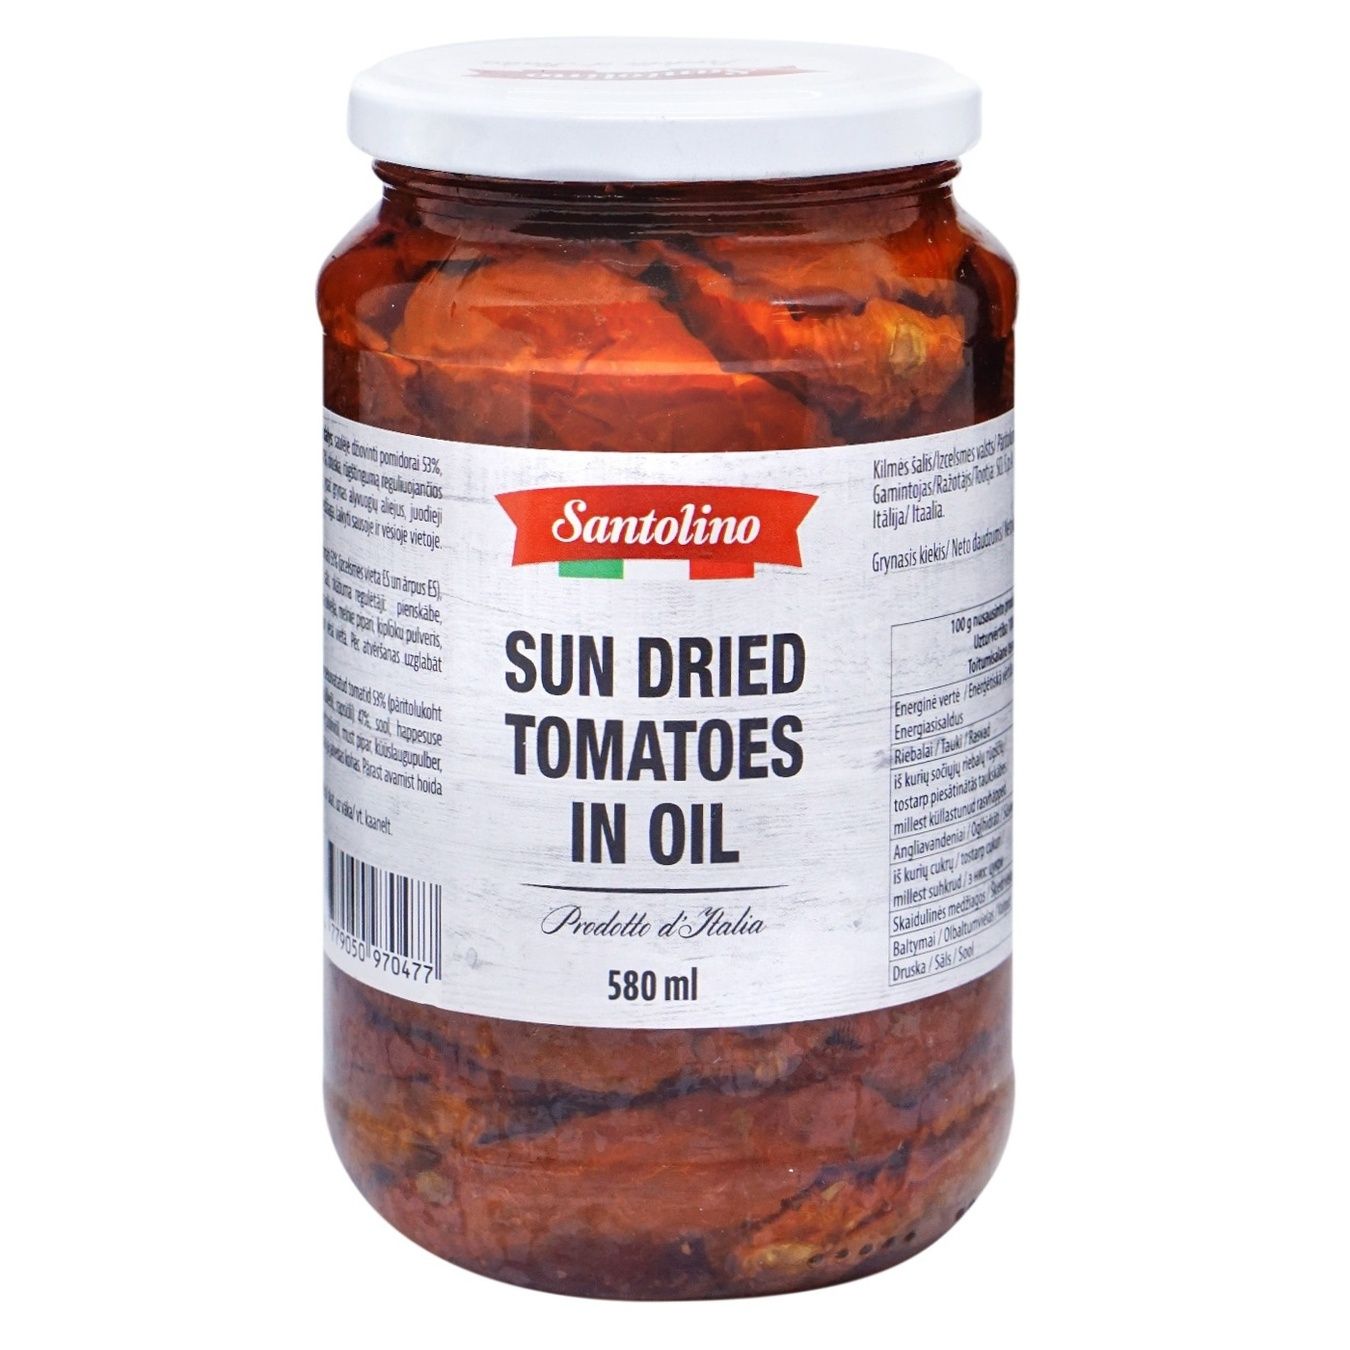 Sun-dried tomatoes Santolino canned in oil 550g